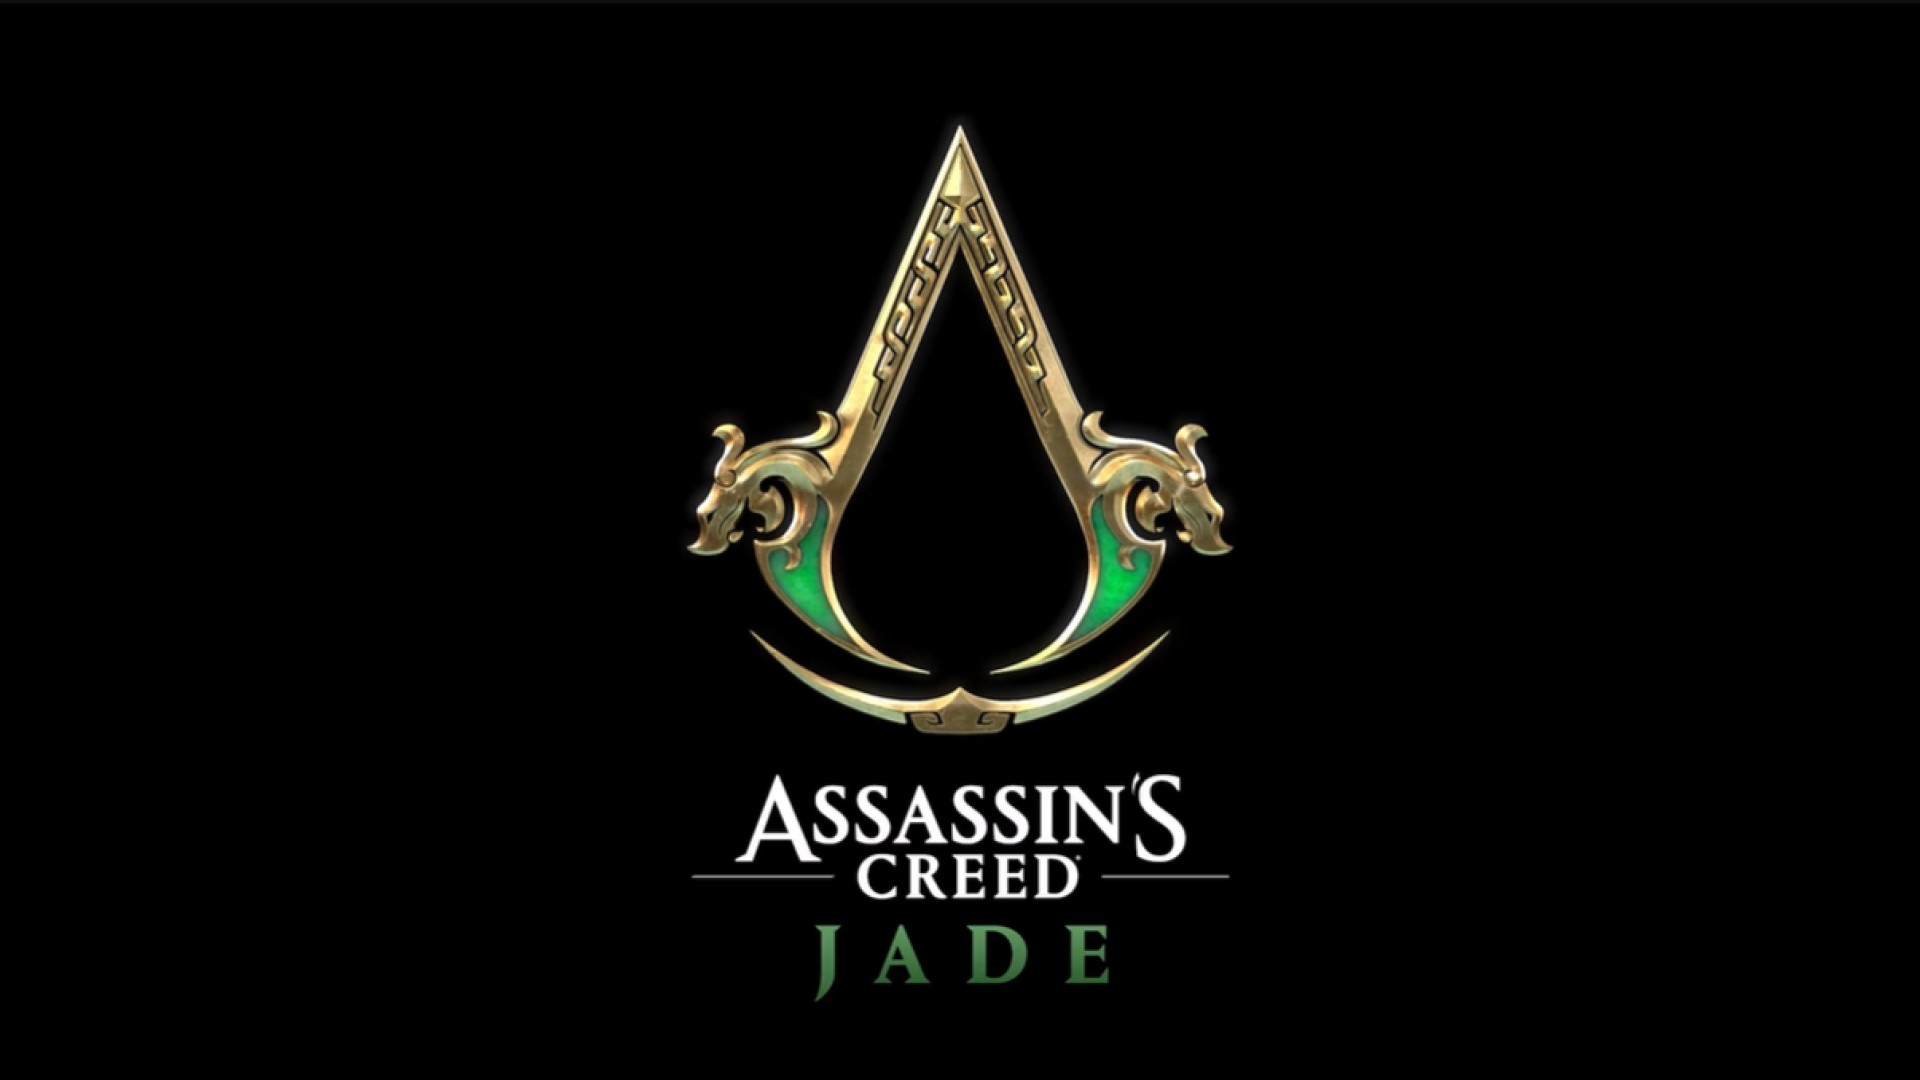 Assassin’s Creed Codename Jade is Now Officially Titled Assassin’s Creed Jade